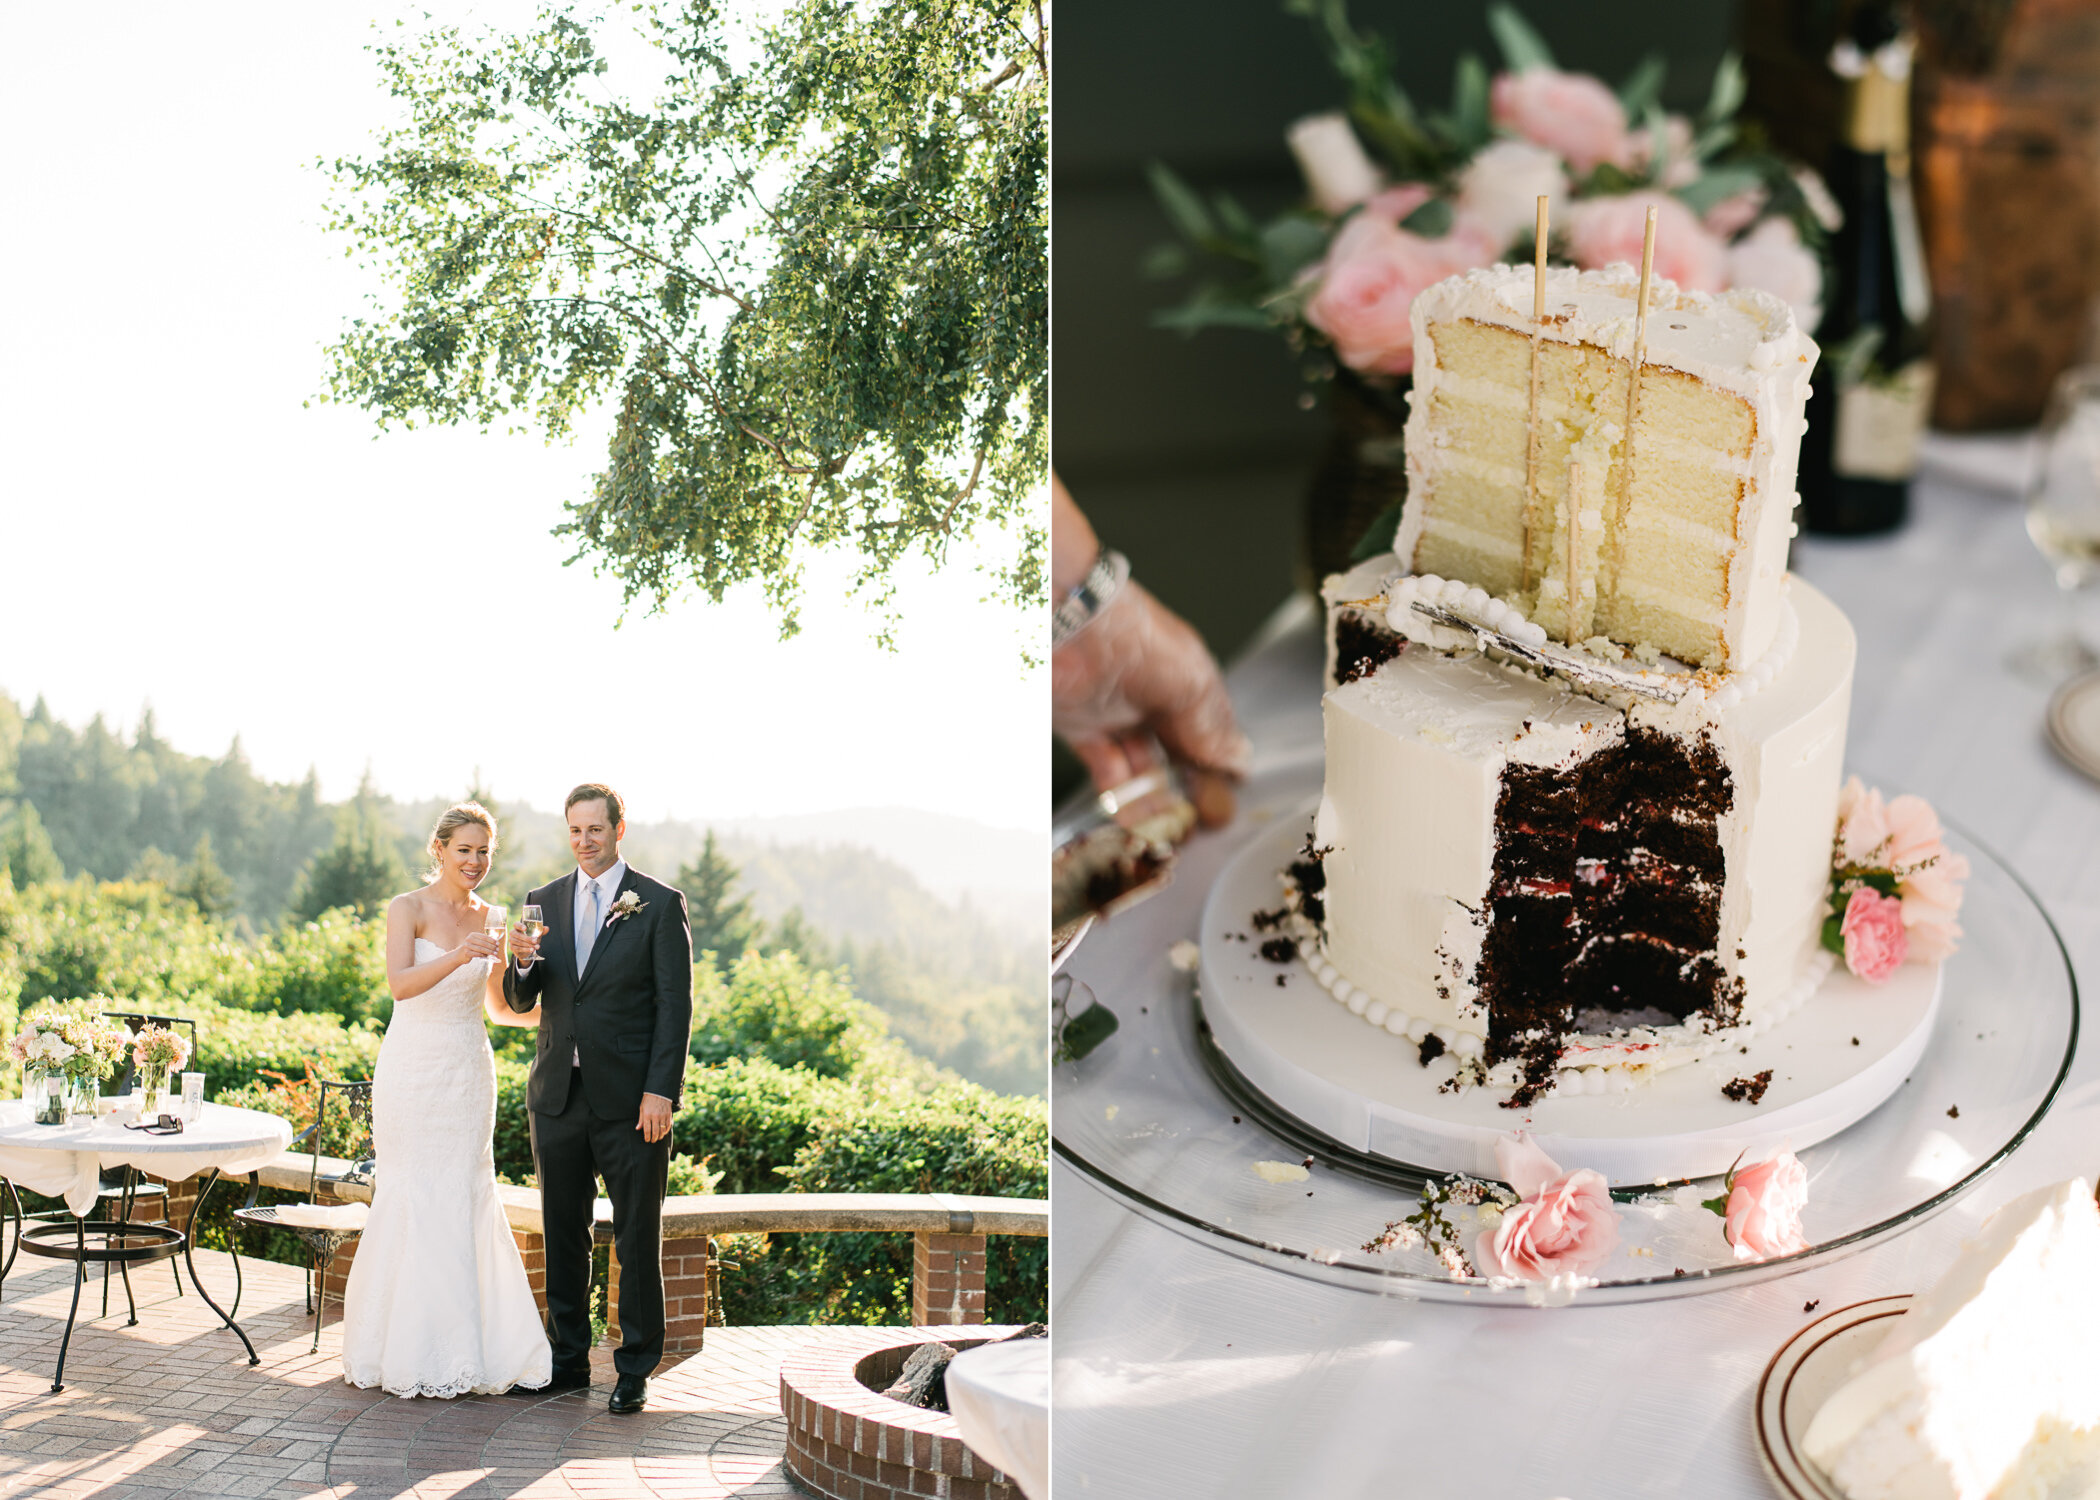  Two layer wedding cake shows slices and toothpicks holding it together 